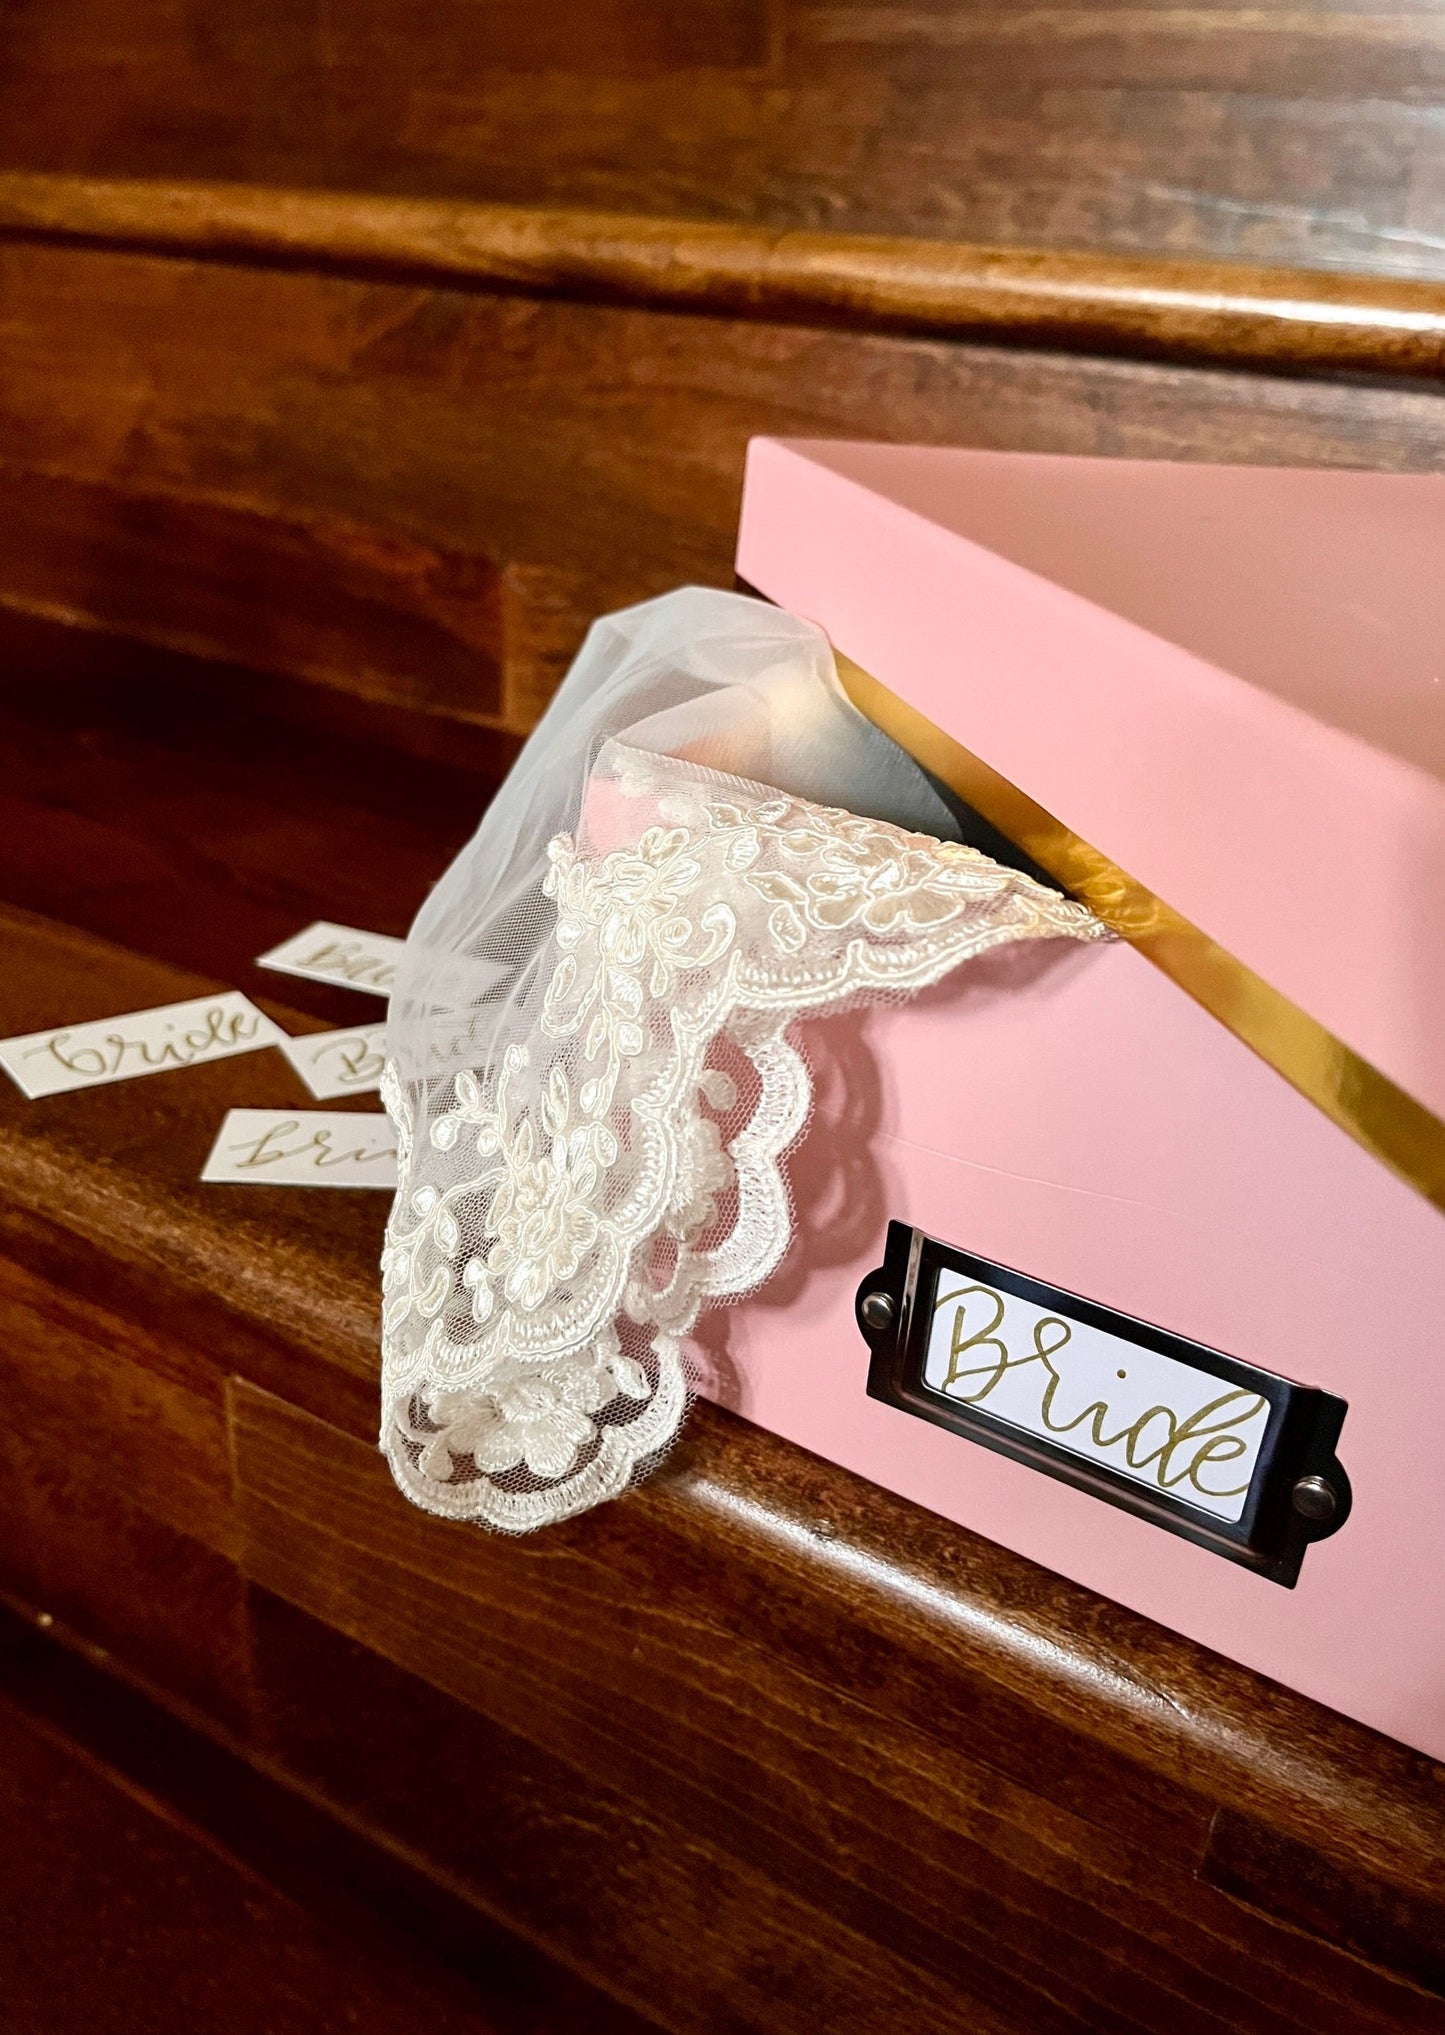 ultimate diy wedding veil supplies kit for making your own fingertip wedding veil with lace